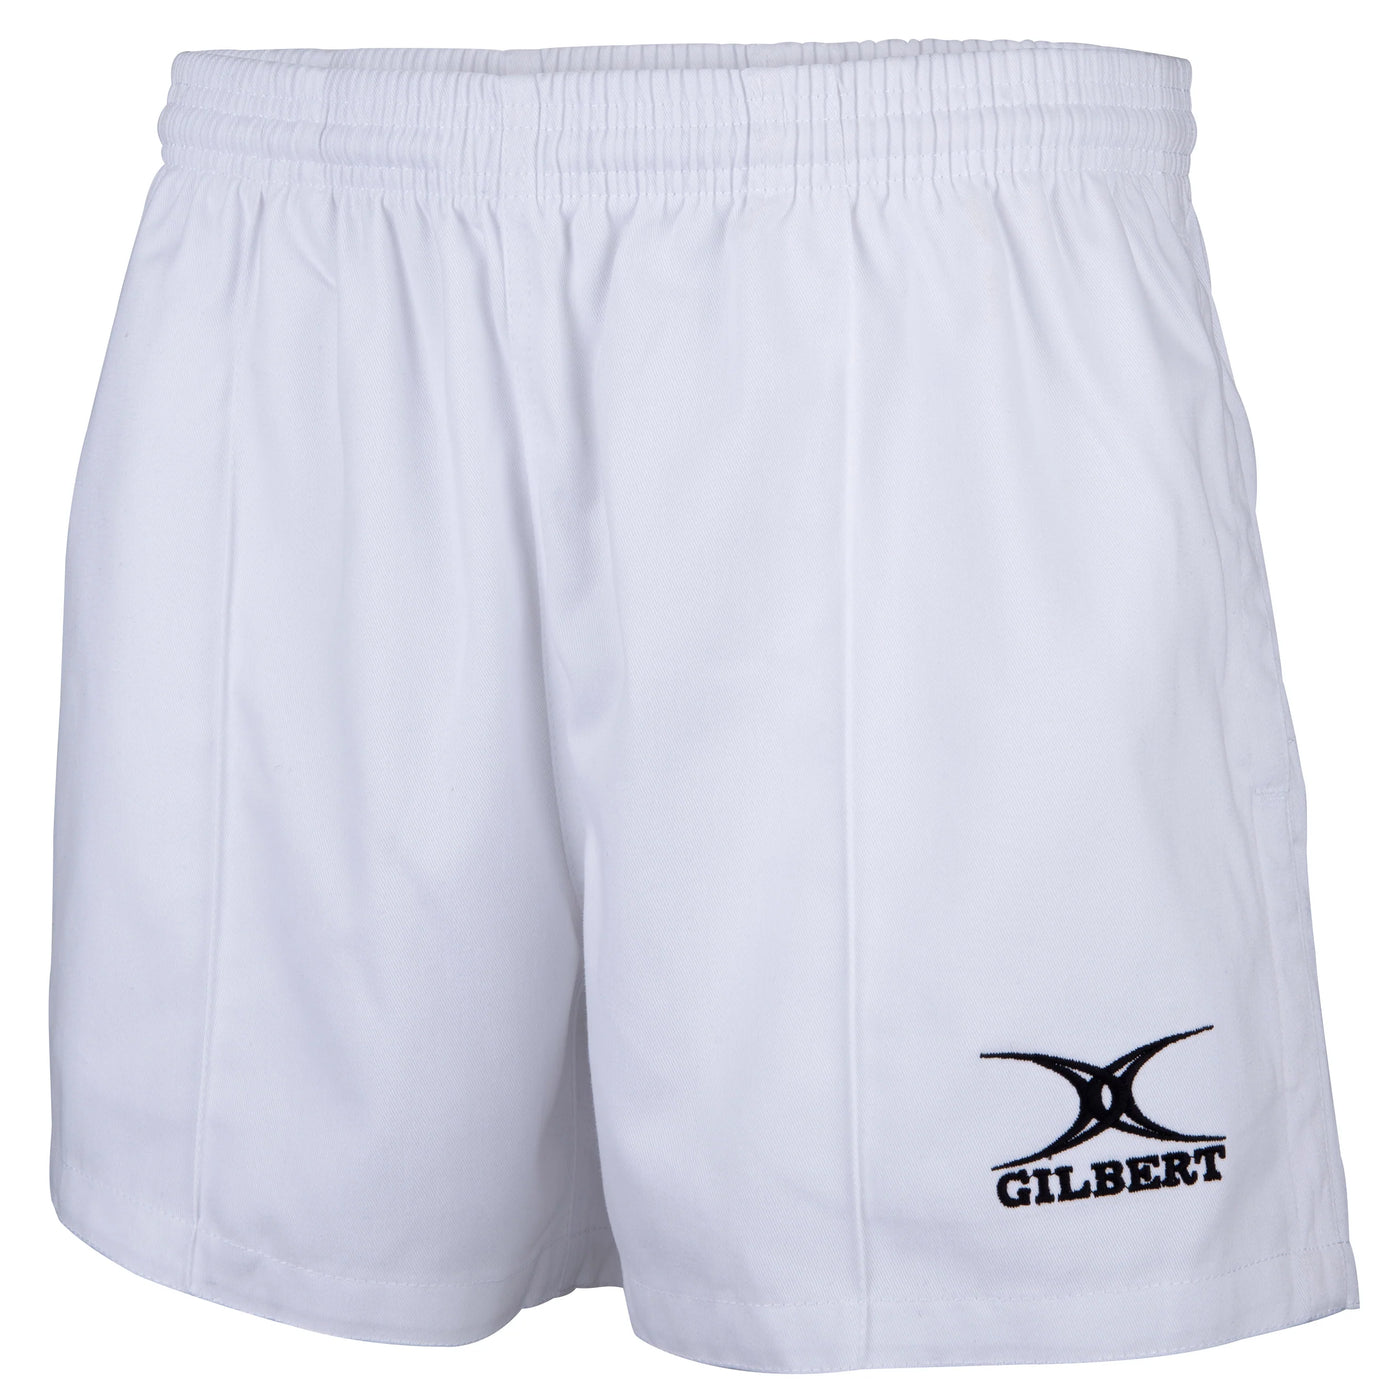 Kiwi Pro Rugby Short White (with pockets)